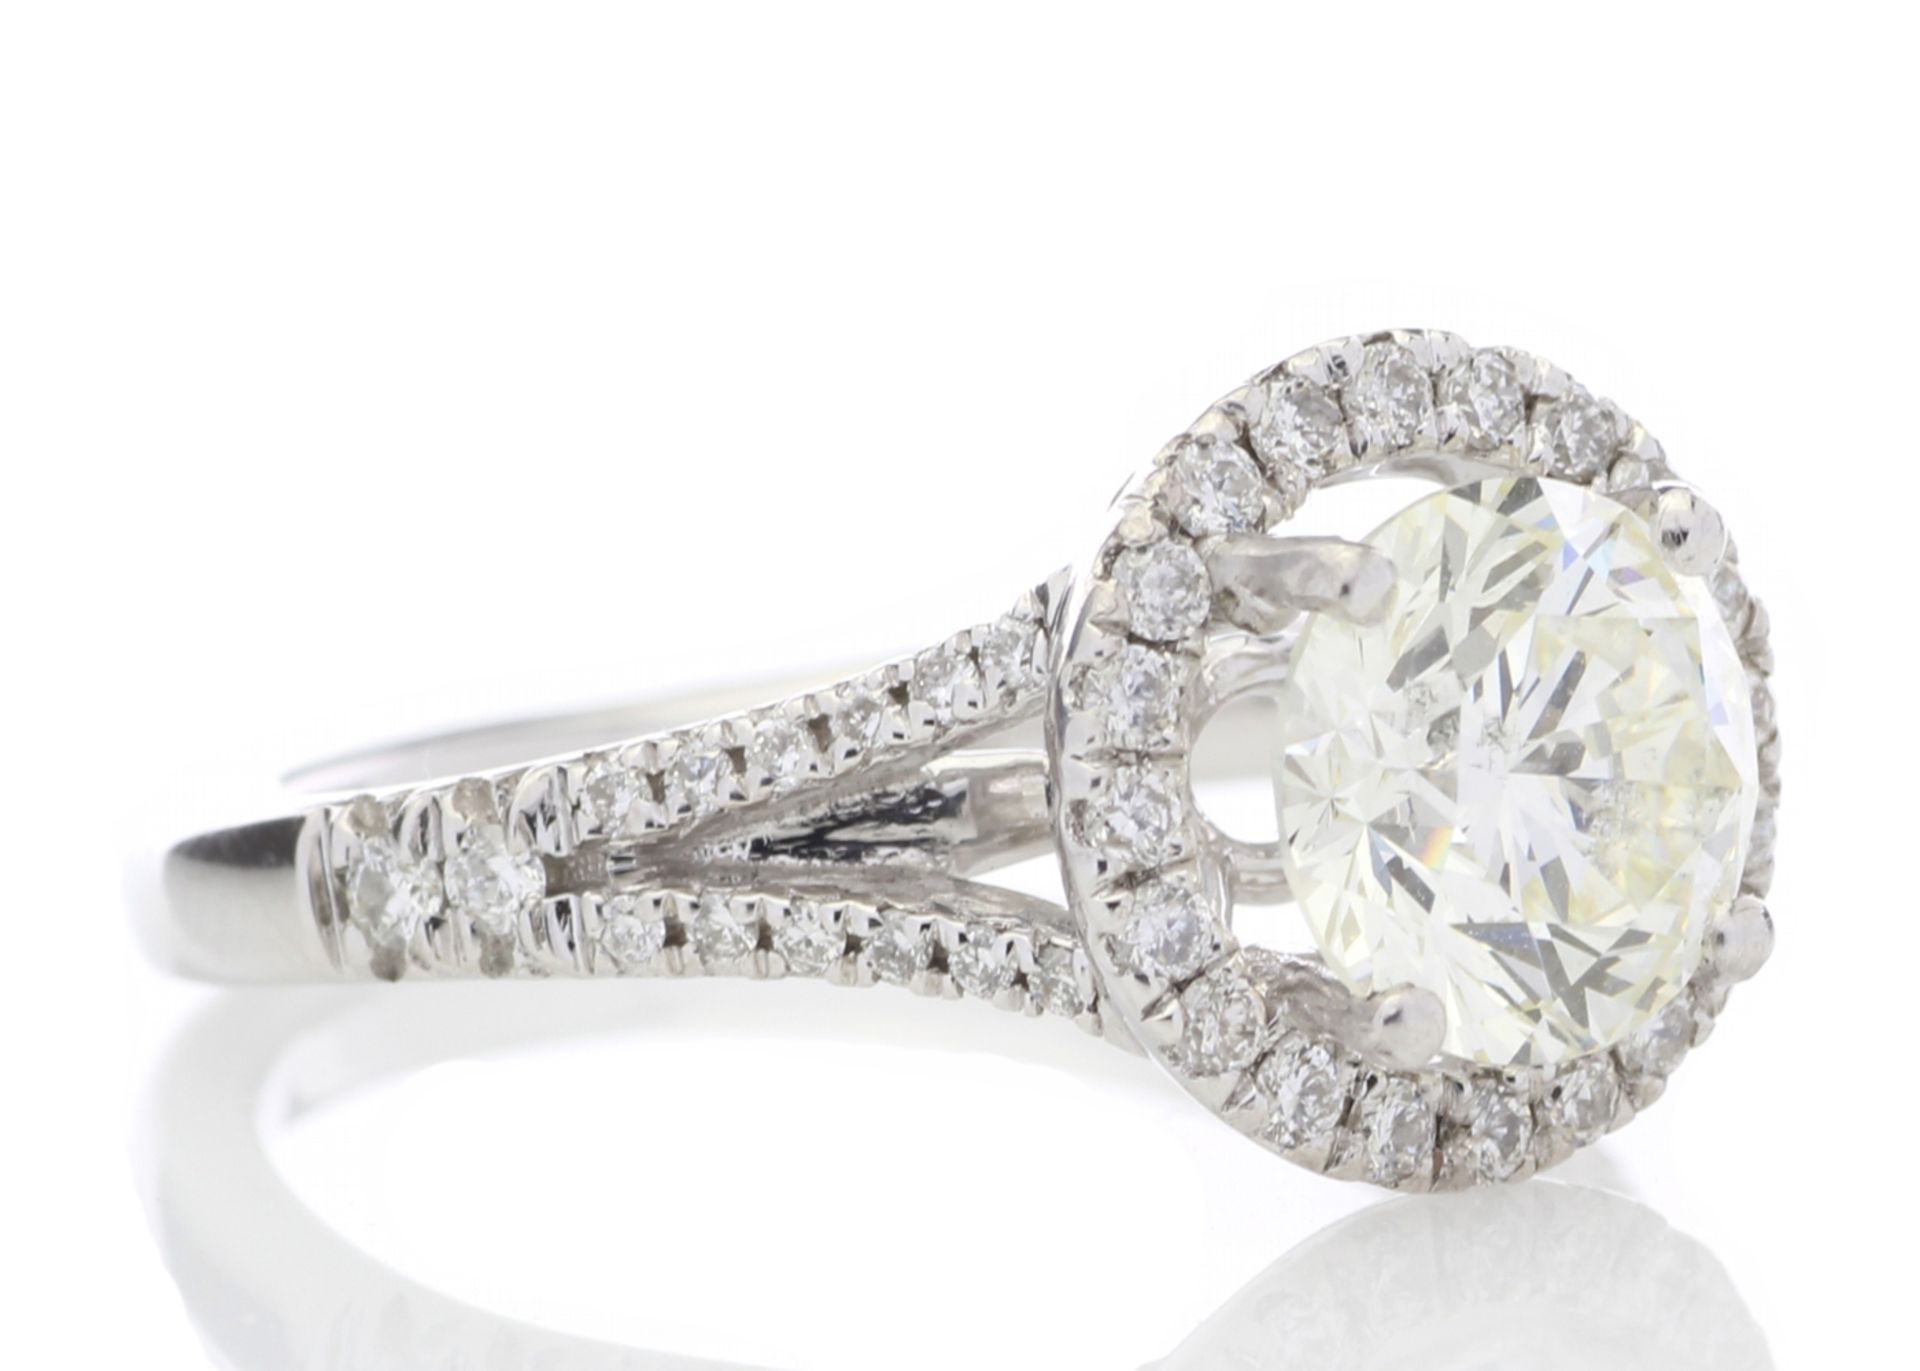 18ct White Gold Single Stone With Halo Setting Ring (1.64) 1.98 Carats - Valued by GIE £80,000. - Image 4 of 5